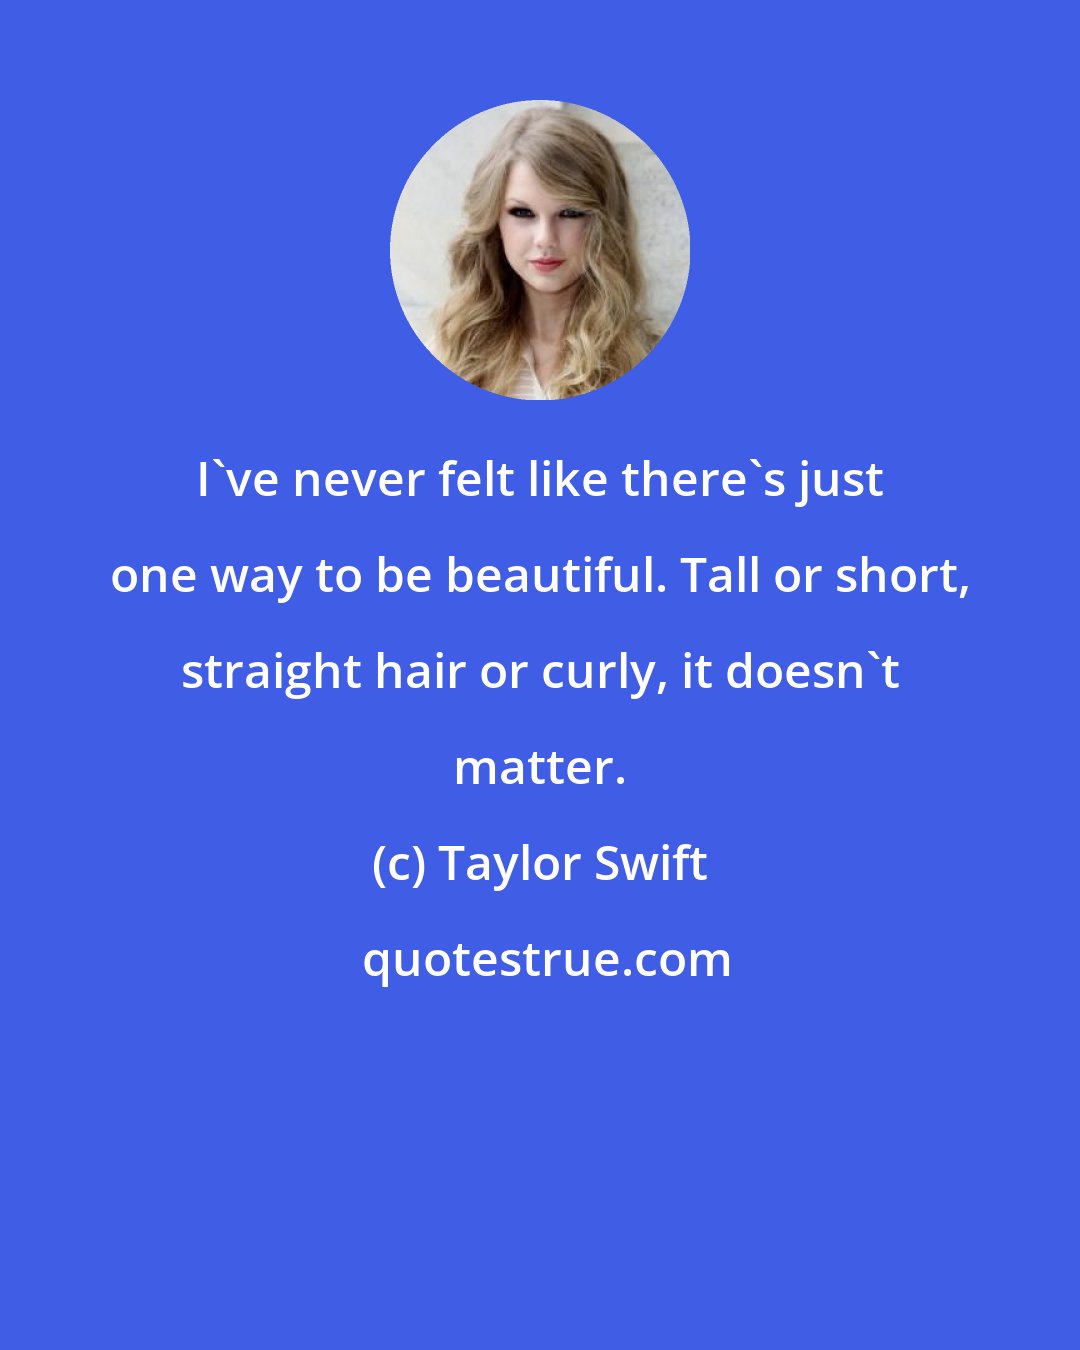 Taylor Swift: I've never felt like there's just one way to be beautiful. Tall or short, straight hair or curly, it doesn't matter.